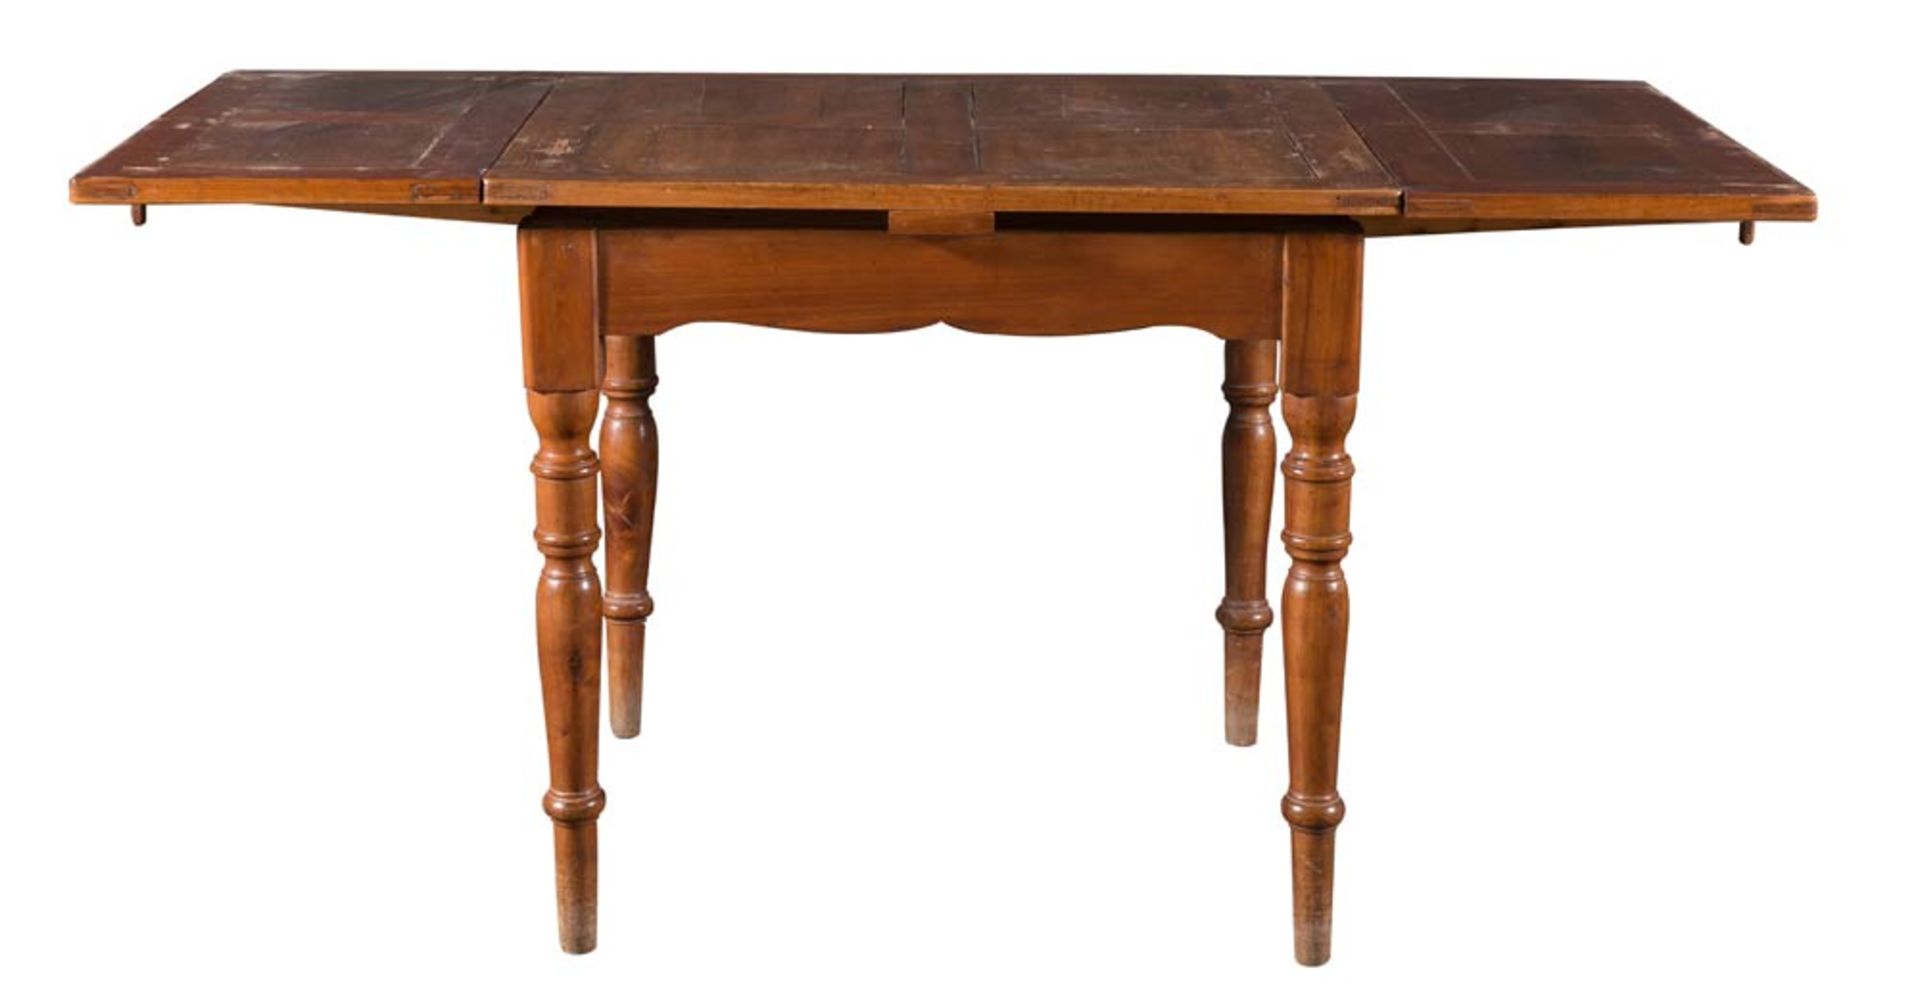 Cherry wood and walnut table with extensions, early 20th Century - Image 2 of 2